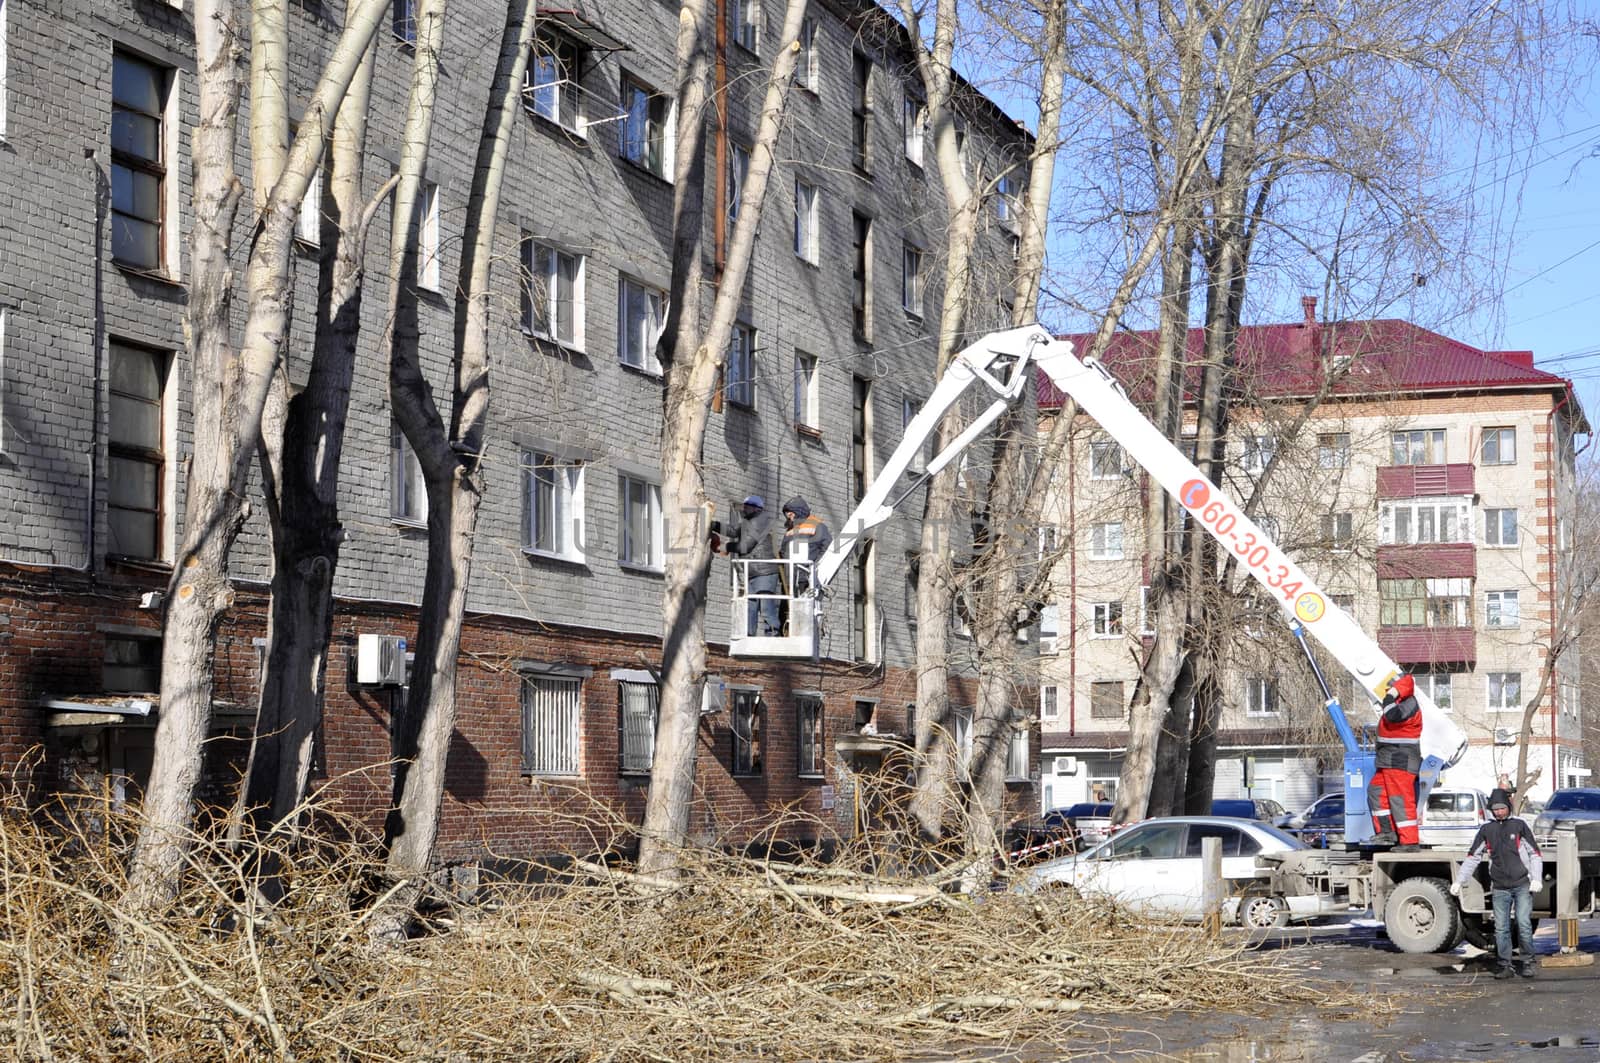 Spring cutting of trees in the city. Tyumen. by veronka72